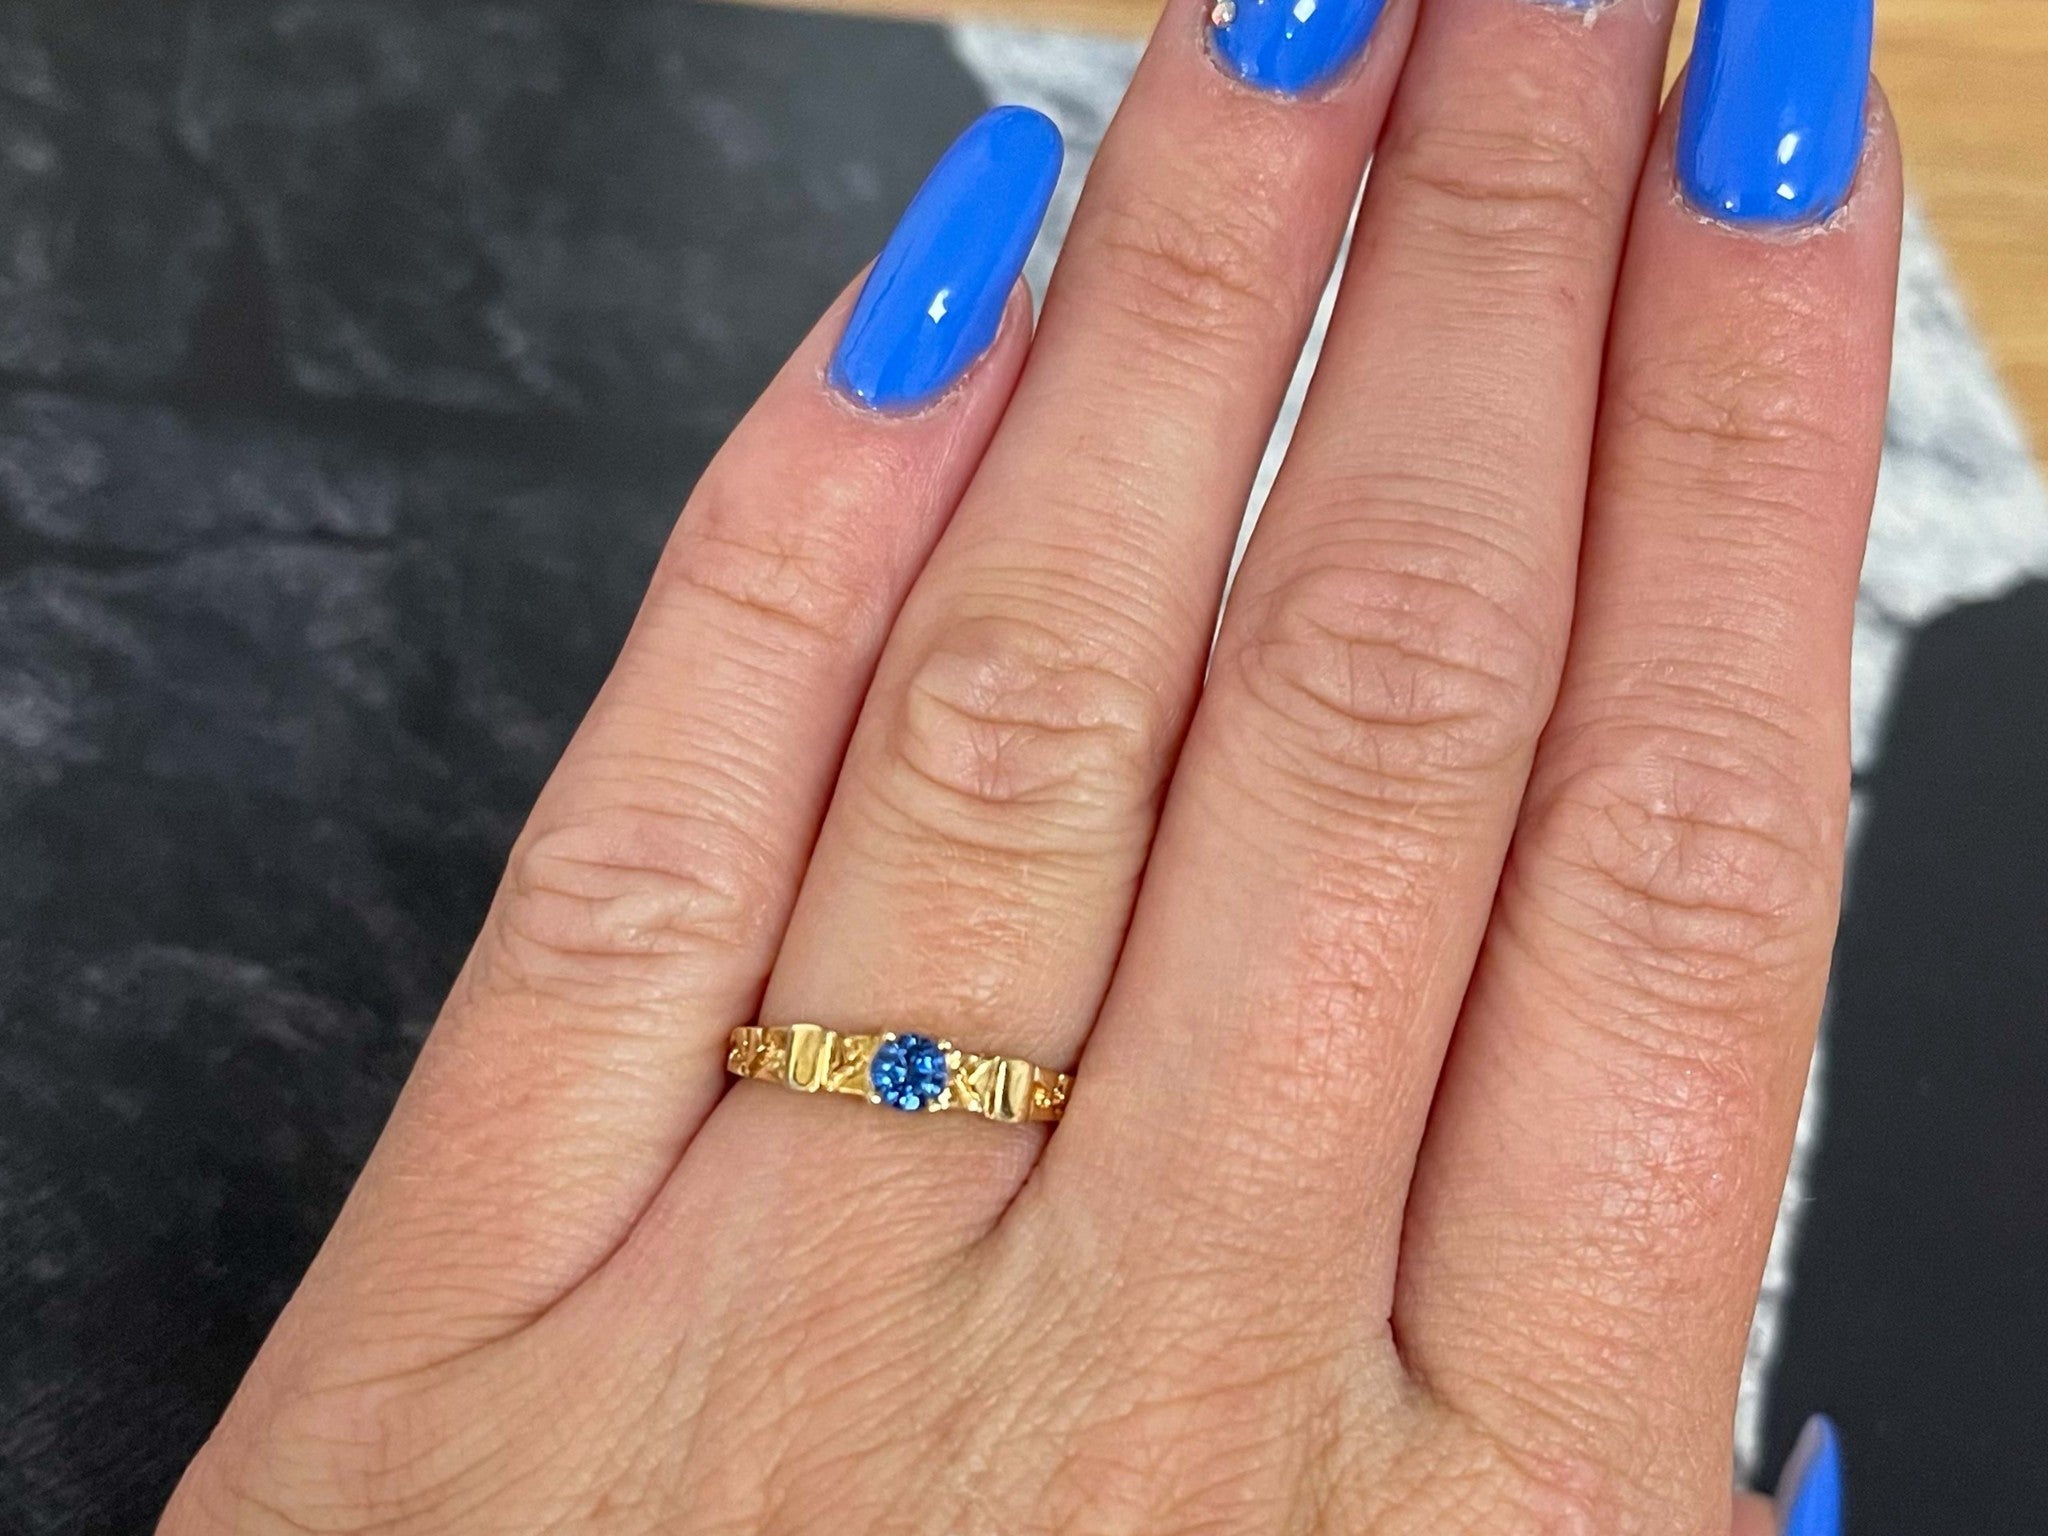 Light Blue Round Sapphire Ring in 14k Yellow Gold